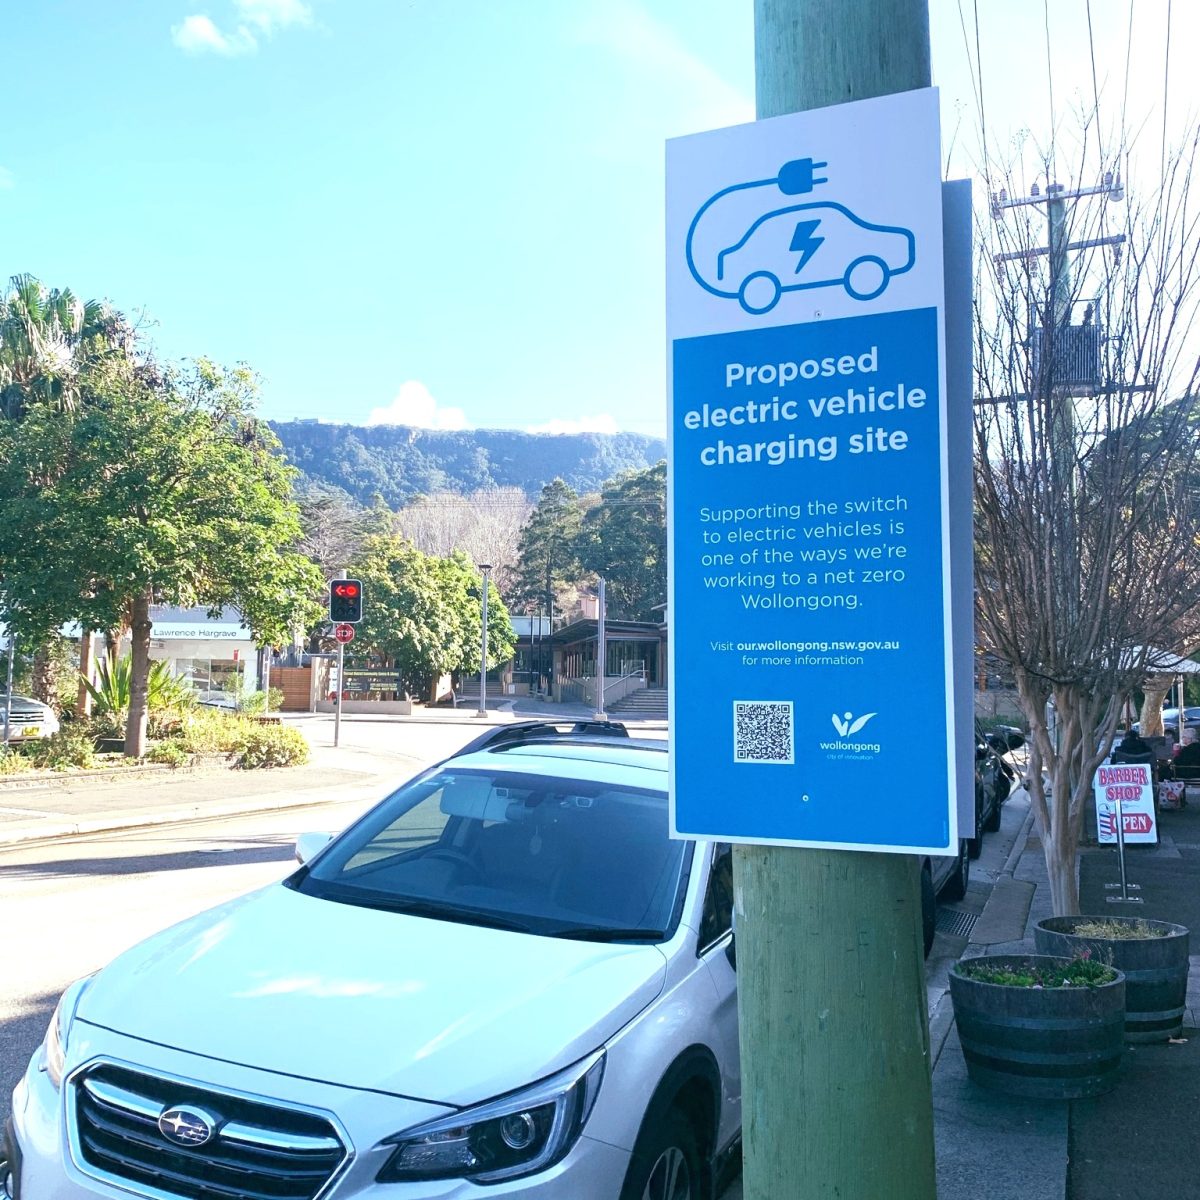 A street sign about a proposed EV charging station in Thirroul.